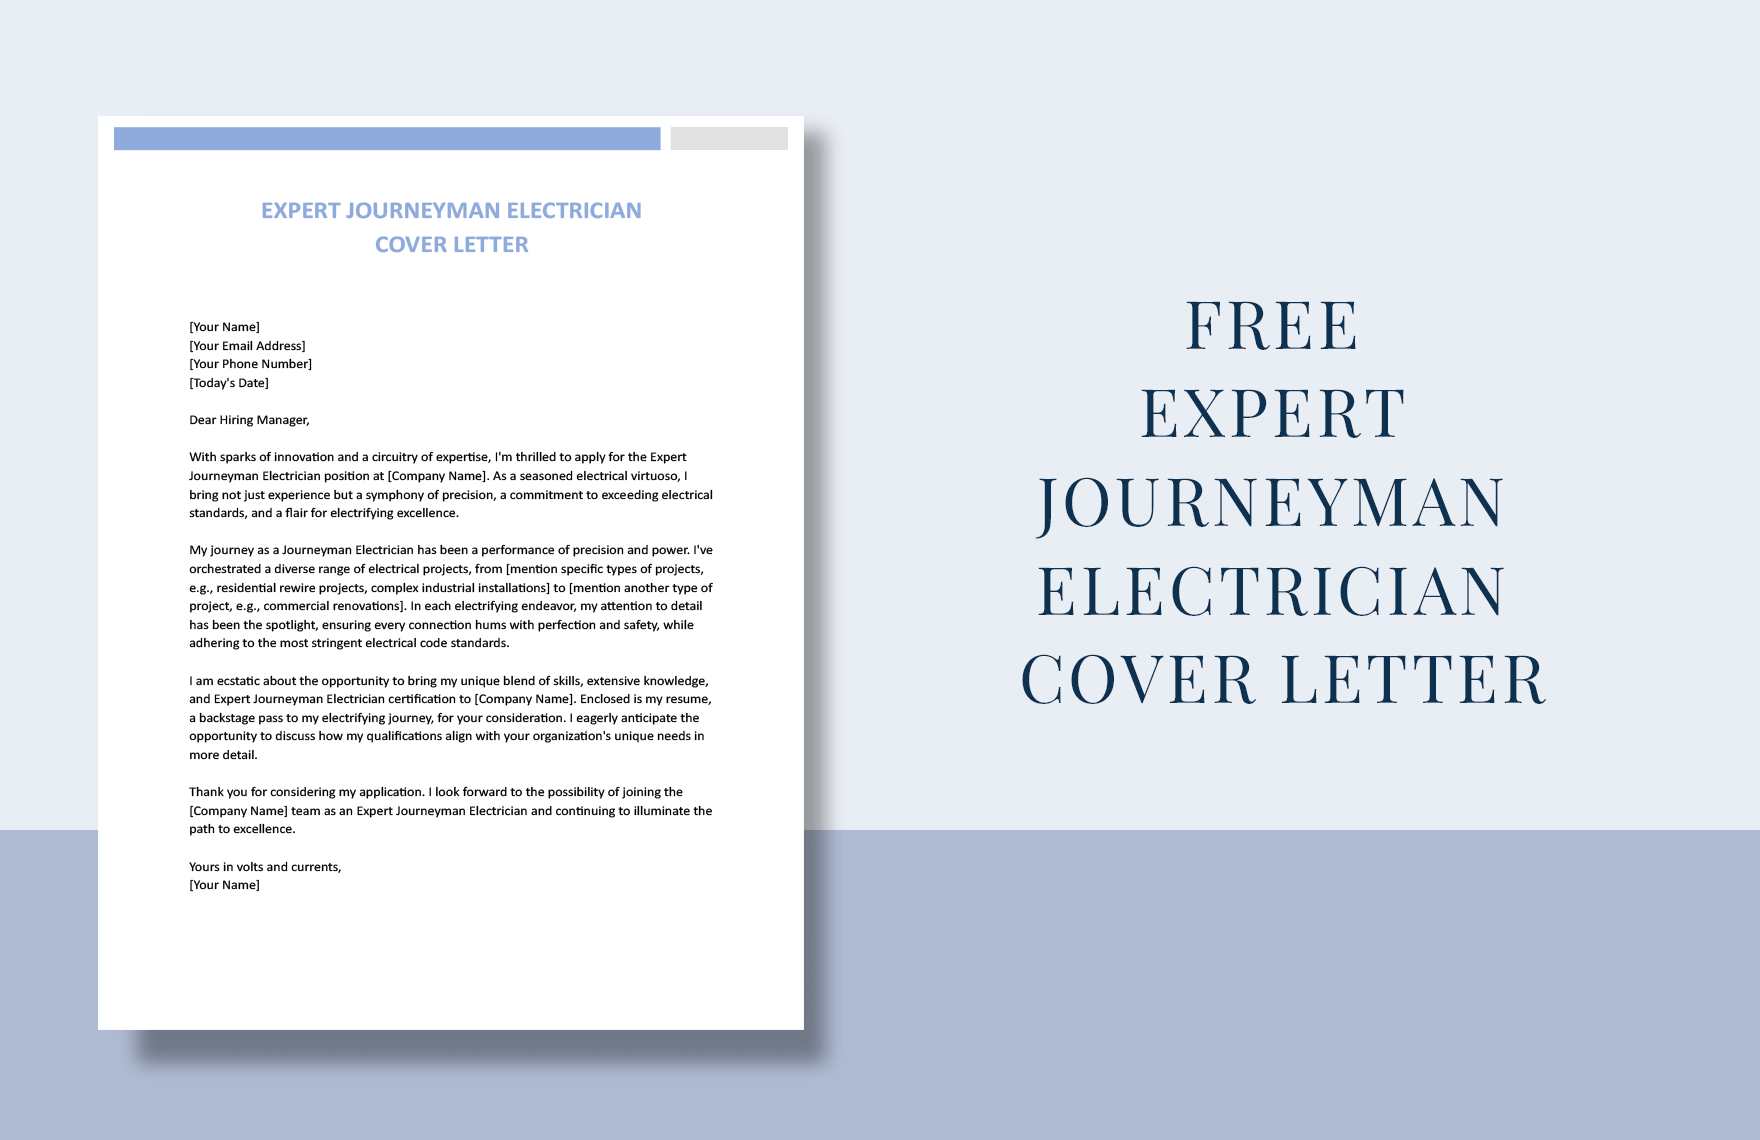 Expert Journeyman Electrician Cover Letter